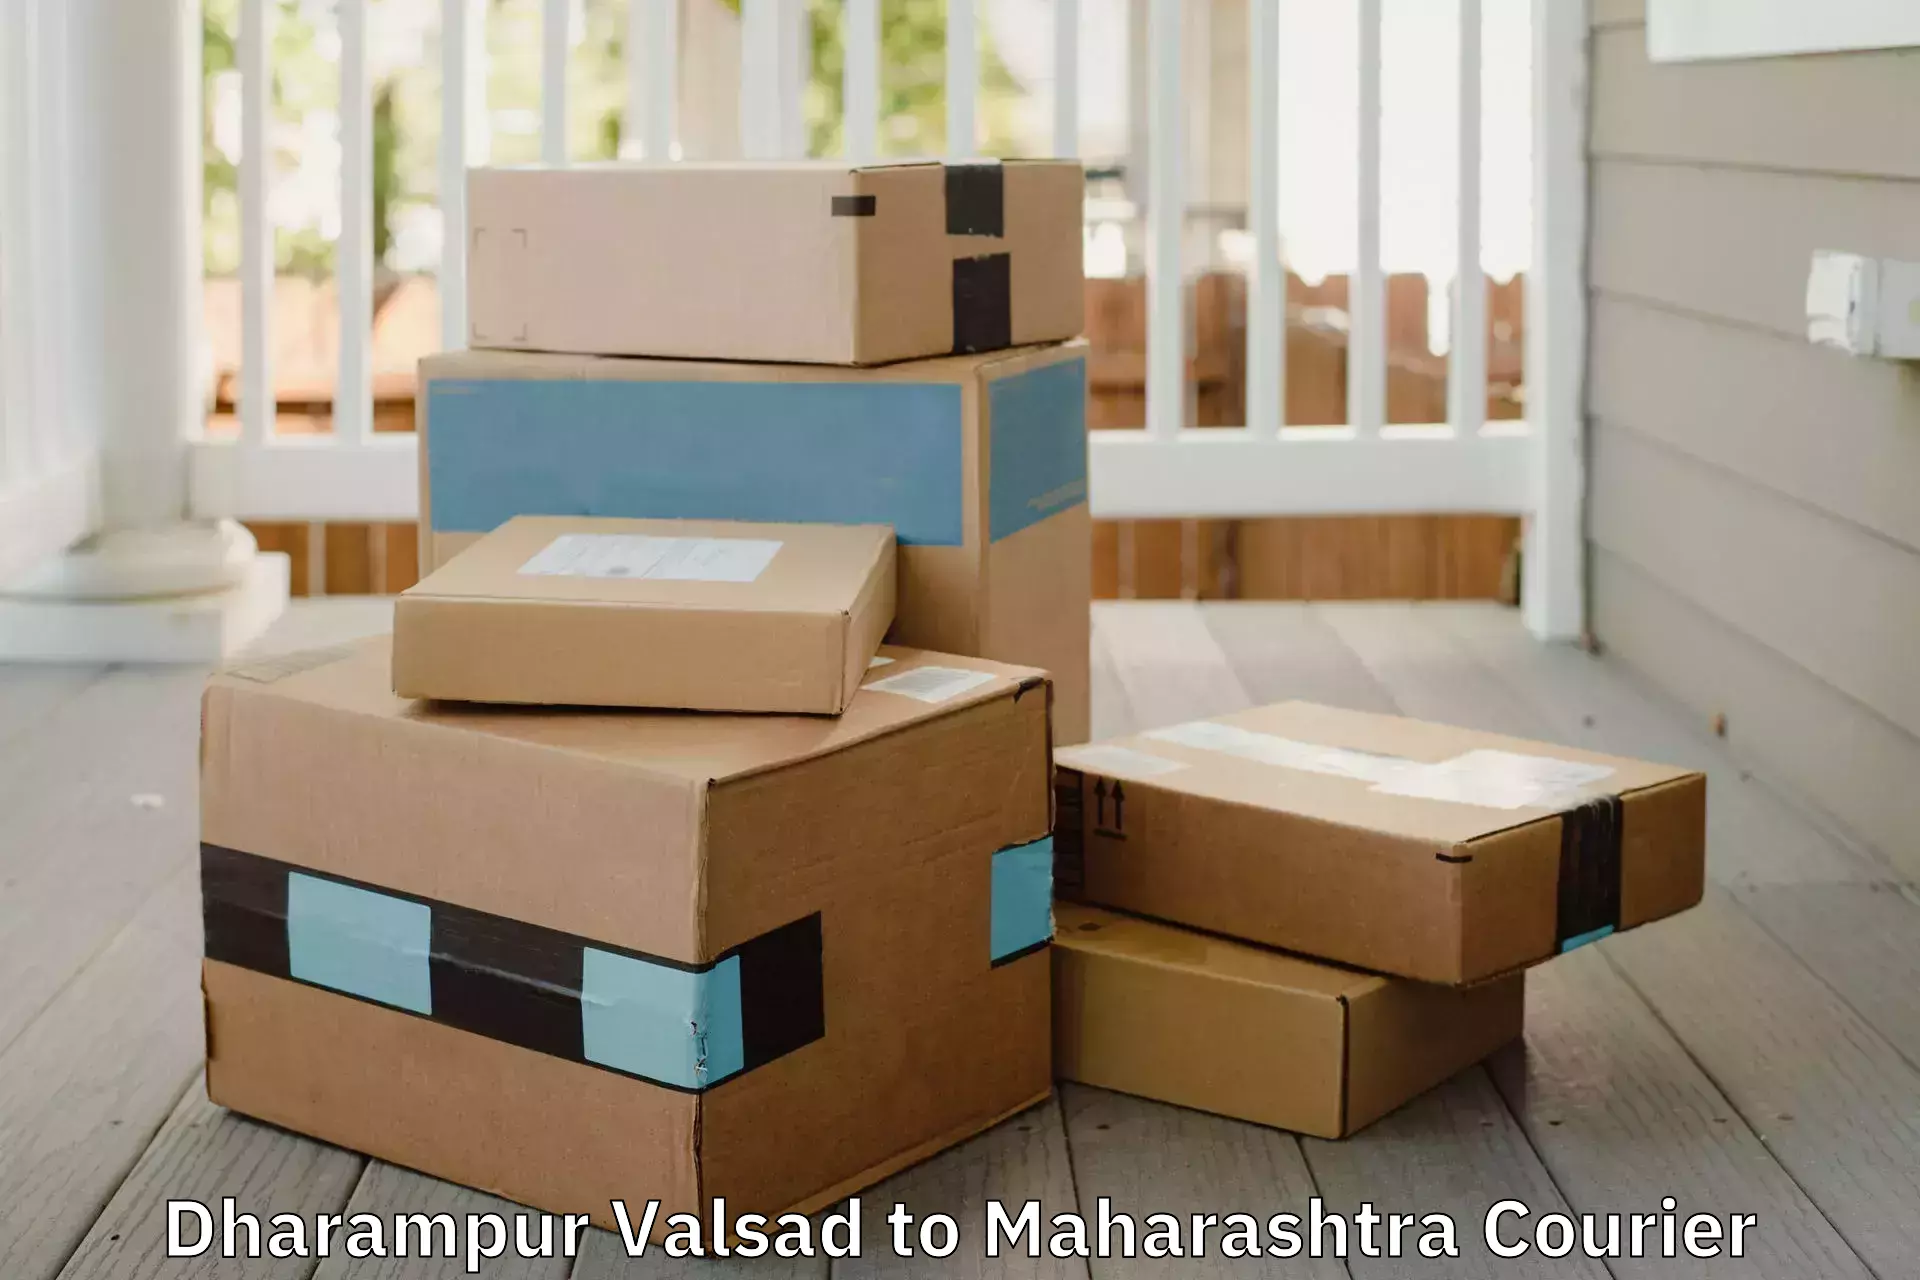 Quality moving services Dharampur Valsad to Institute of Chemical Technology Mumbai